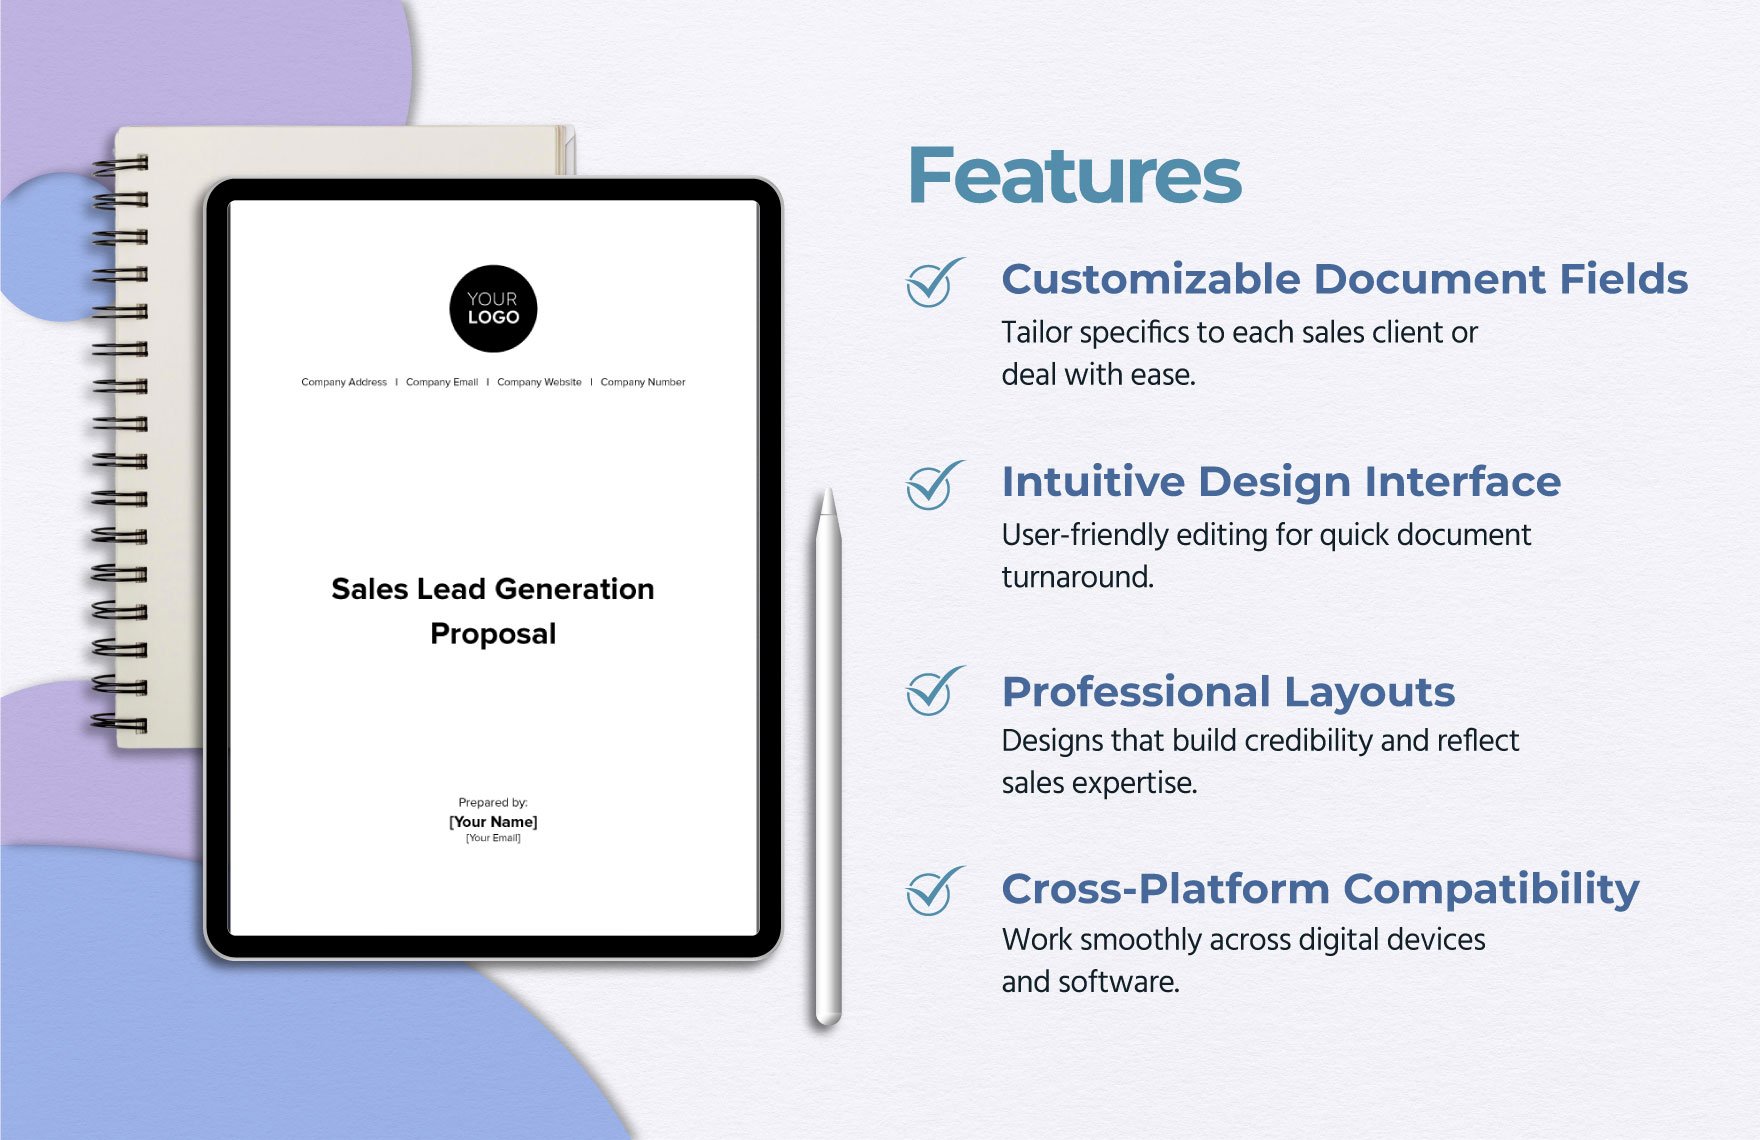 Sales Lead Generation Proposal Template